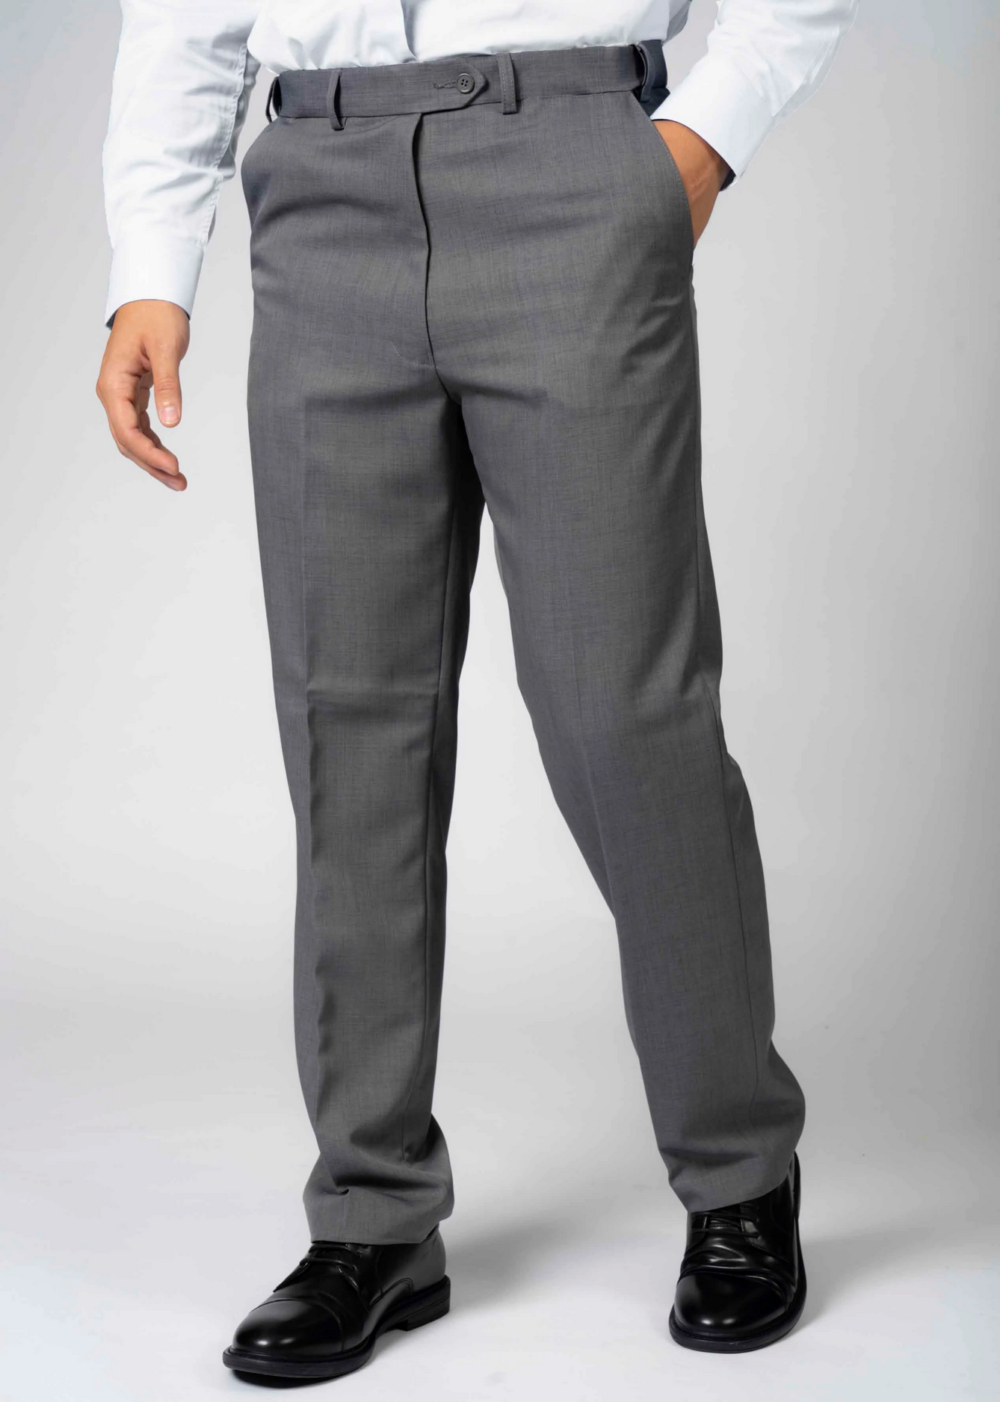 Buy Green Trousers & Pants for Men by Andamen Online | Ajio.com